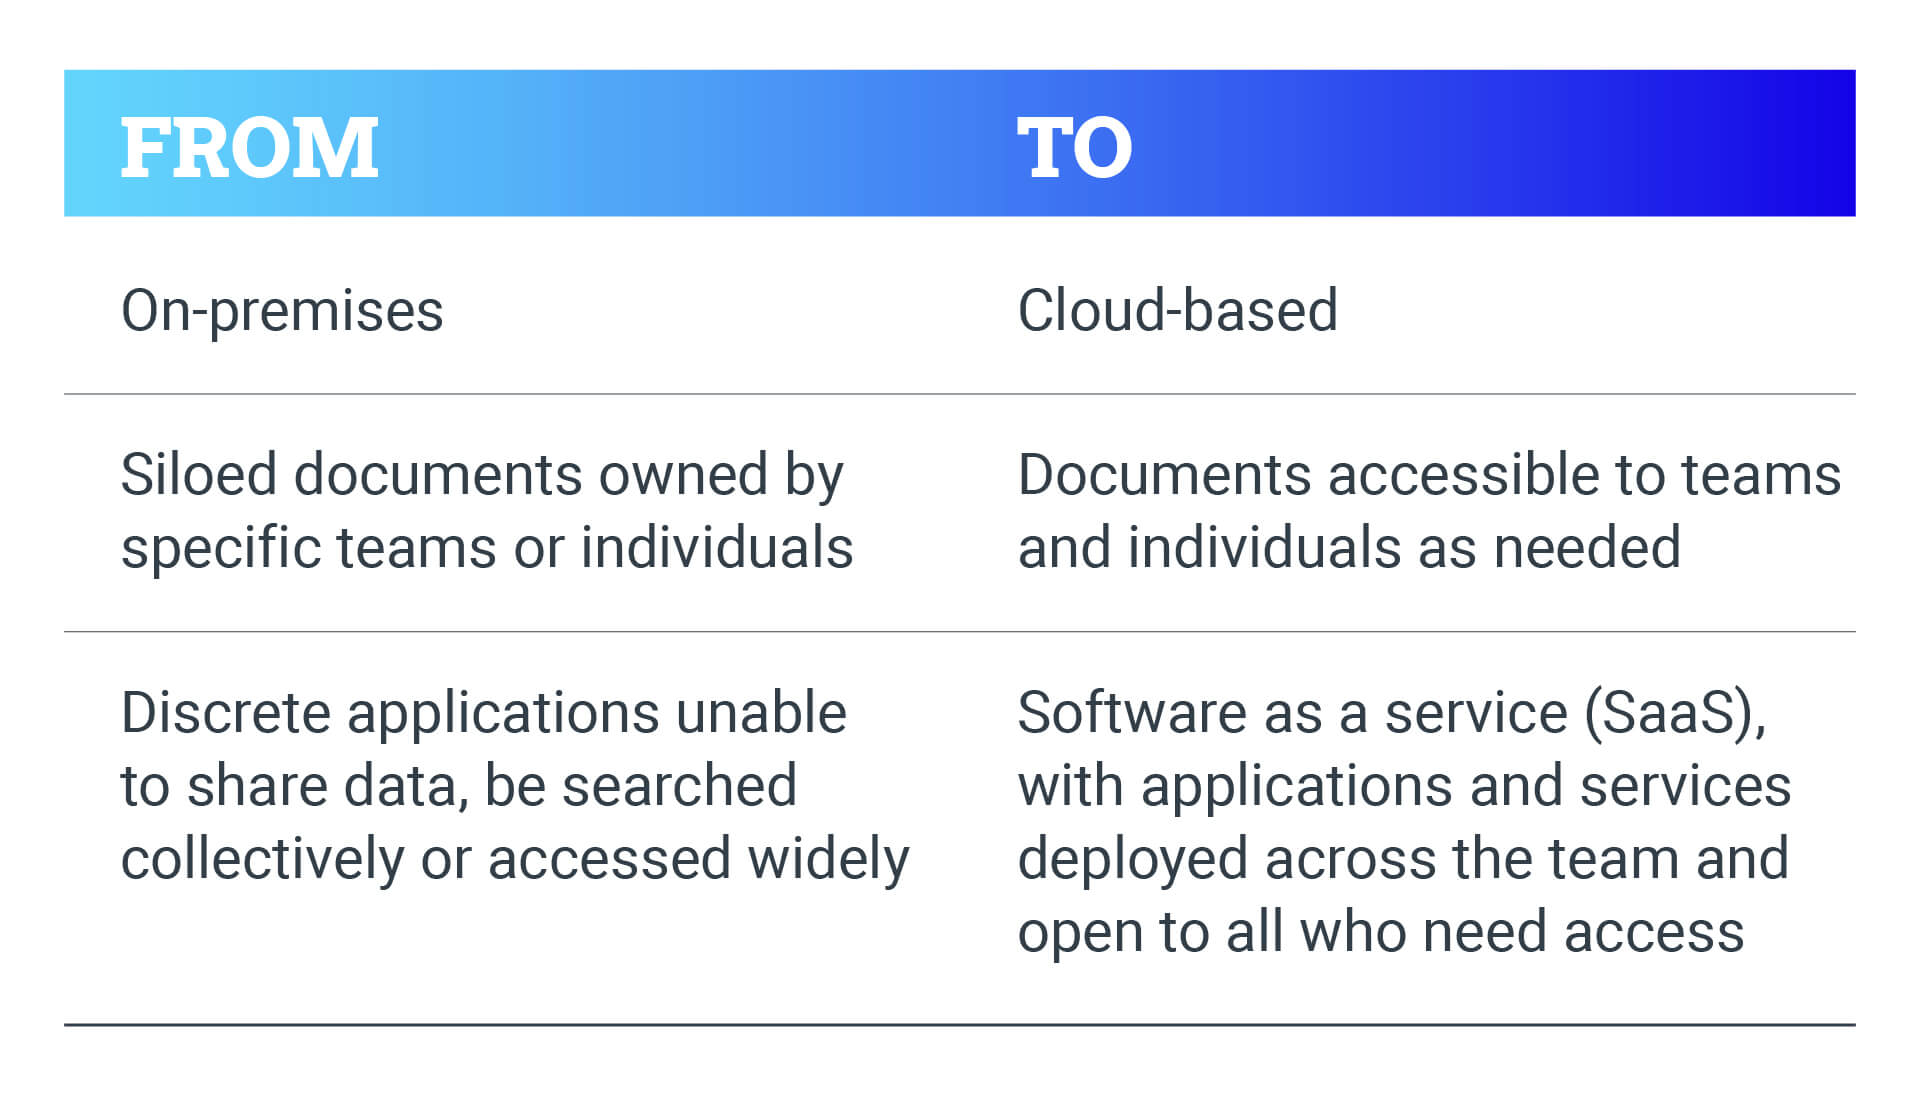 Documents and applications are moving to the cloud